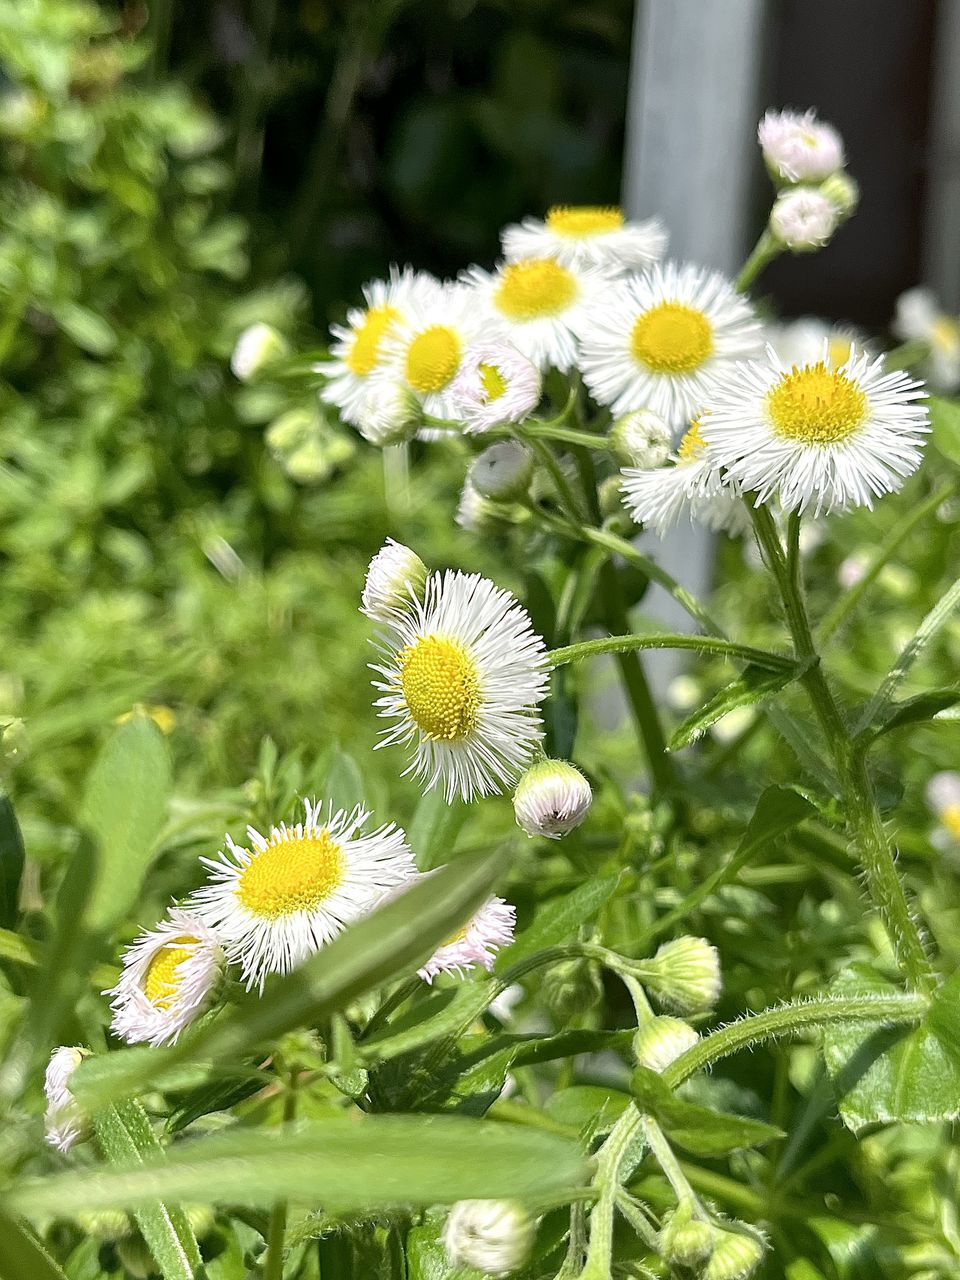 flower, flowering plant, plant, freshness, beauty in nature, fragility, flower head, growth, nature, meadow, close-up, daisy, inflorescence, white, yellow, petal, no people, wildflower, green, day, focus on foreground, outdoors, botany, springtime, plant part, grass, leaf, garden, blossom, herb